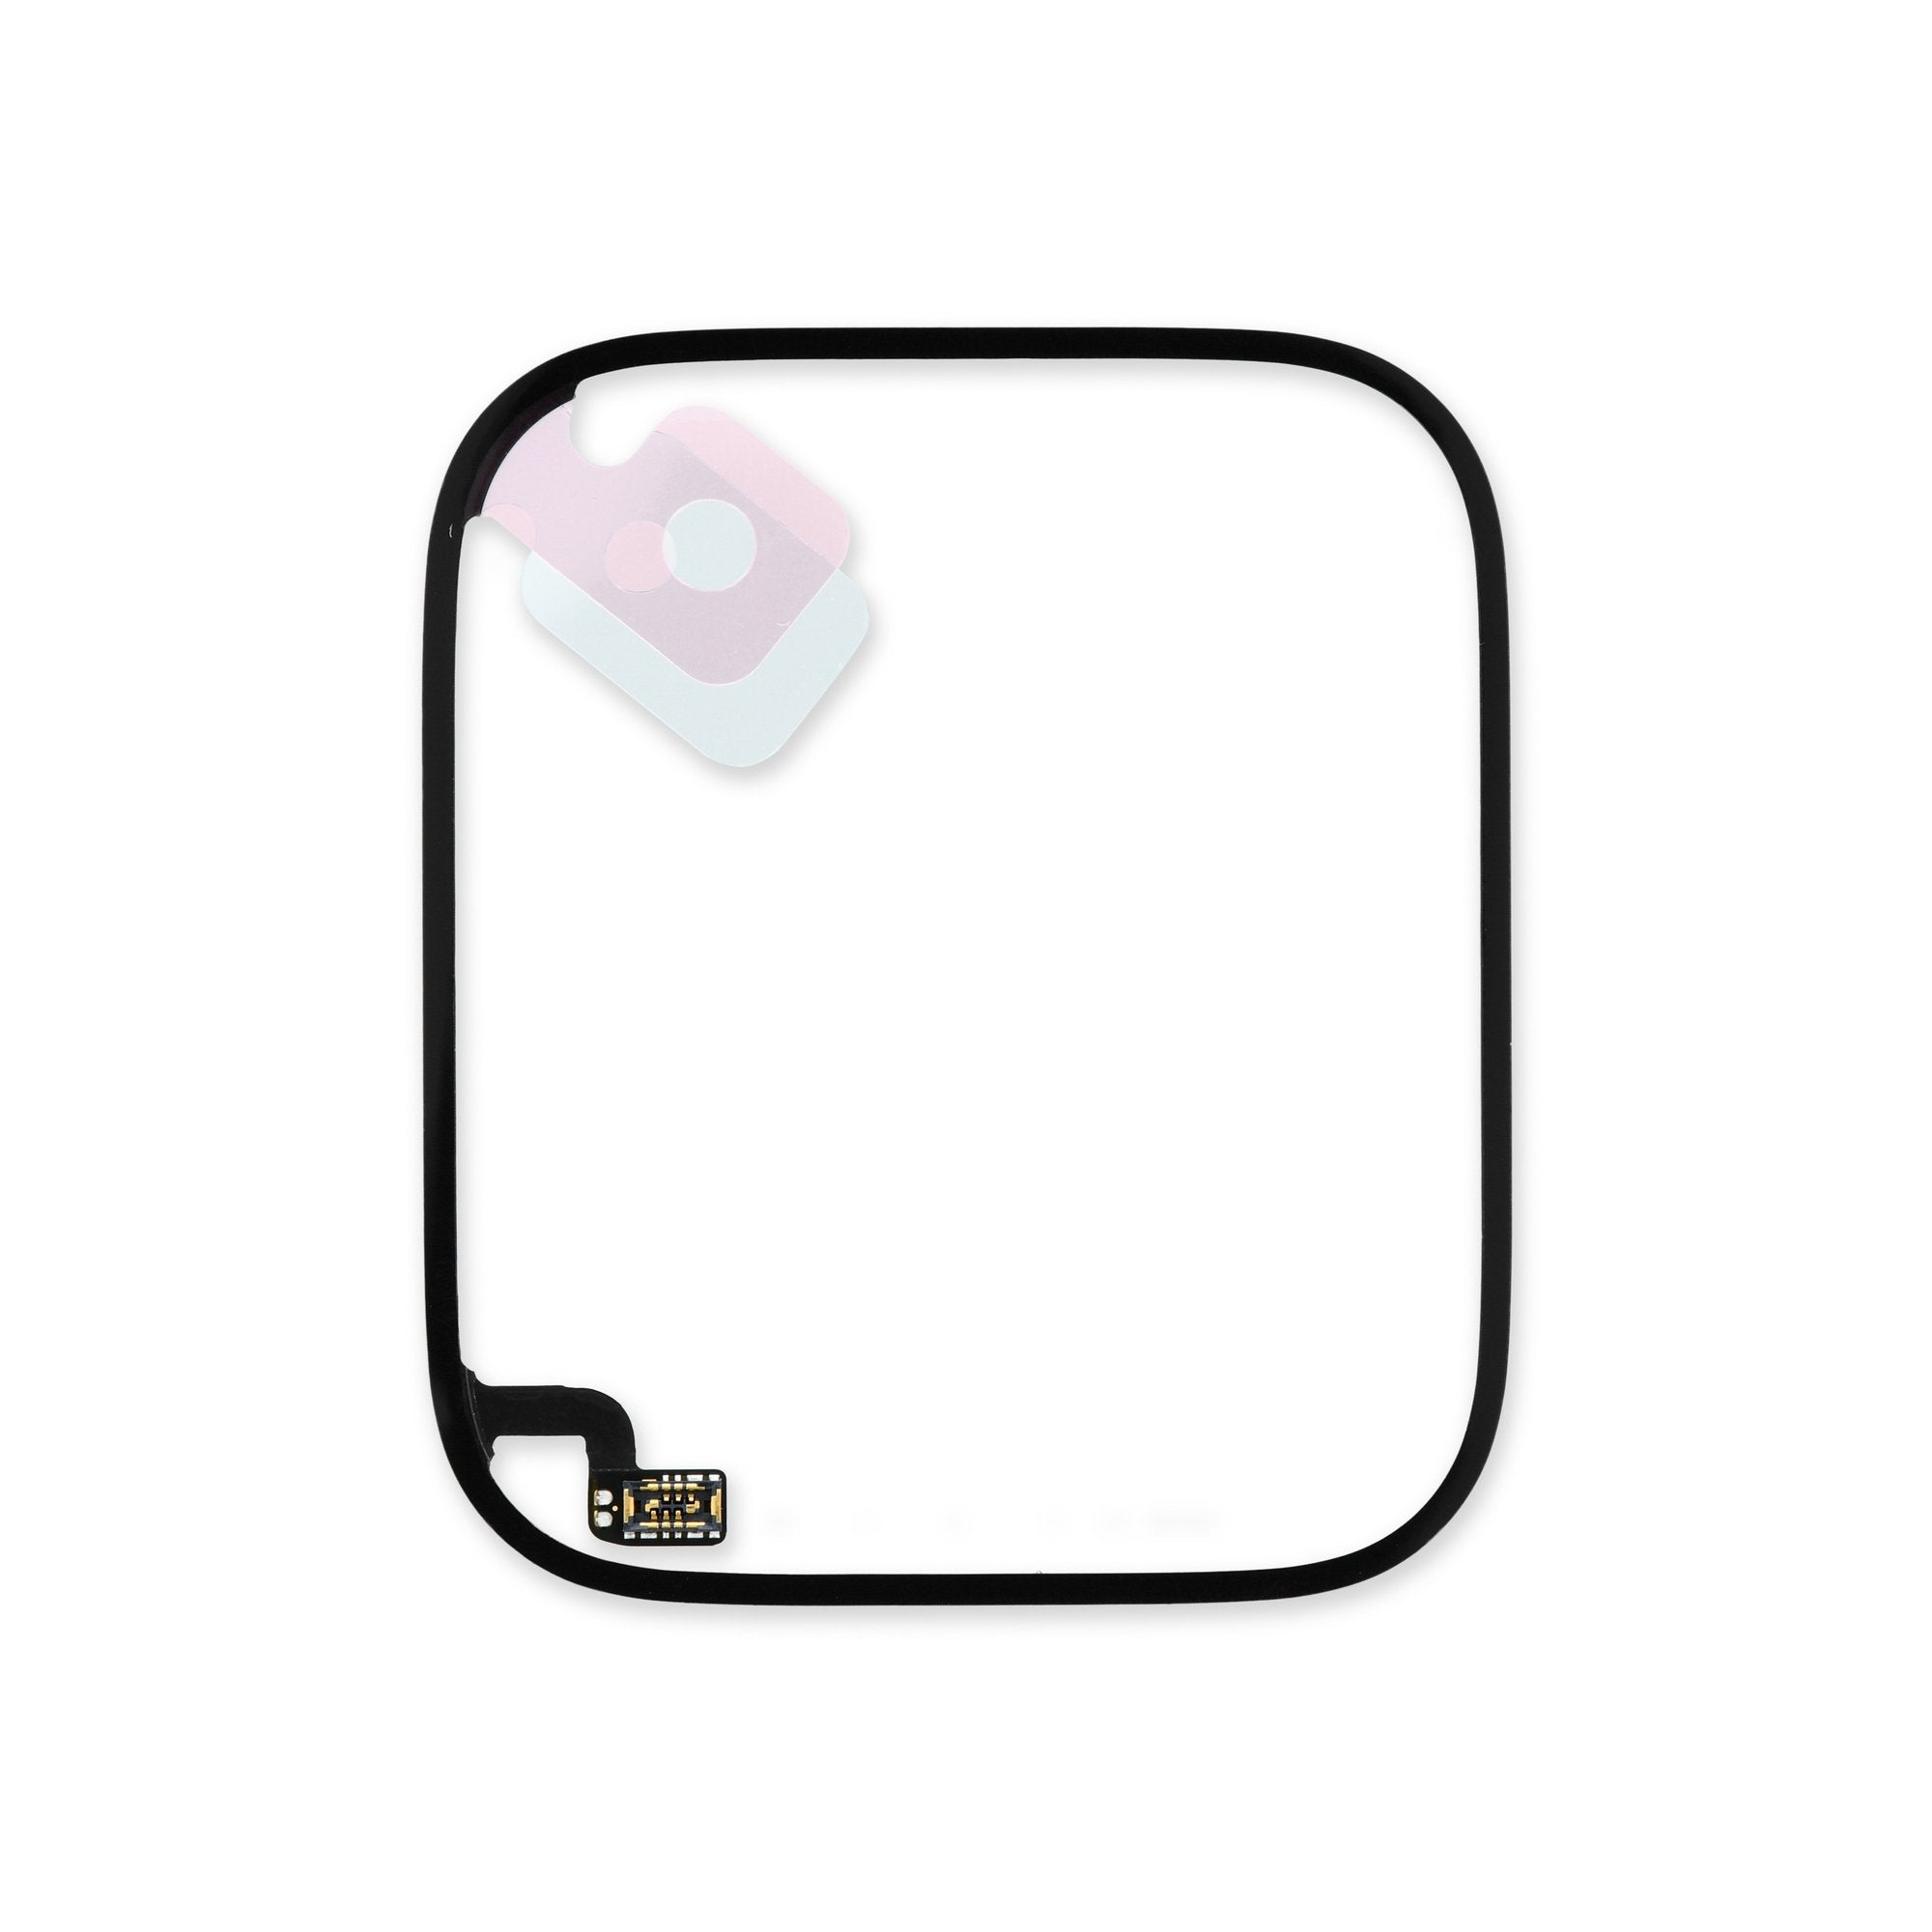 Apple Watch (40 mm Series 5) Force Touch Sensor Gasket New Installation Adhesive Included